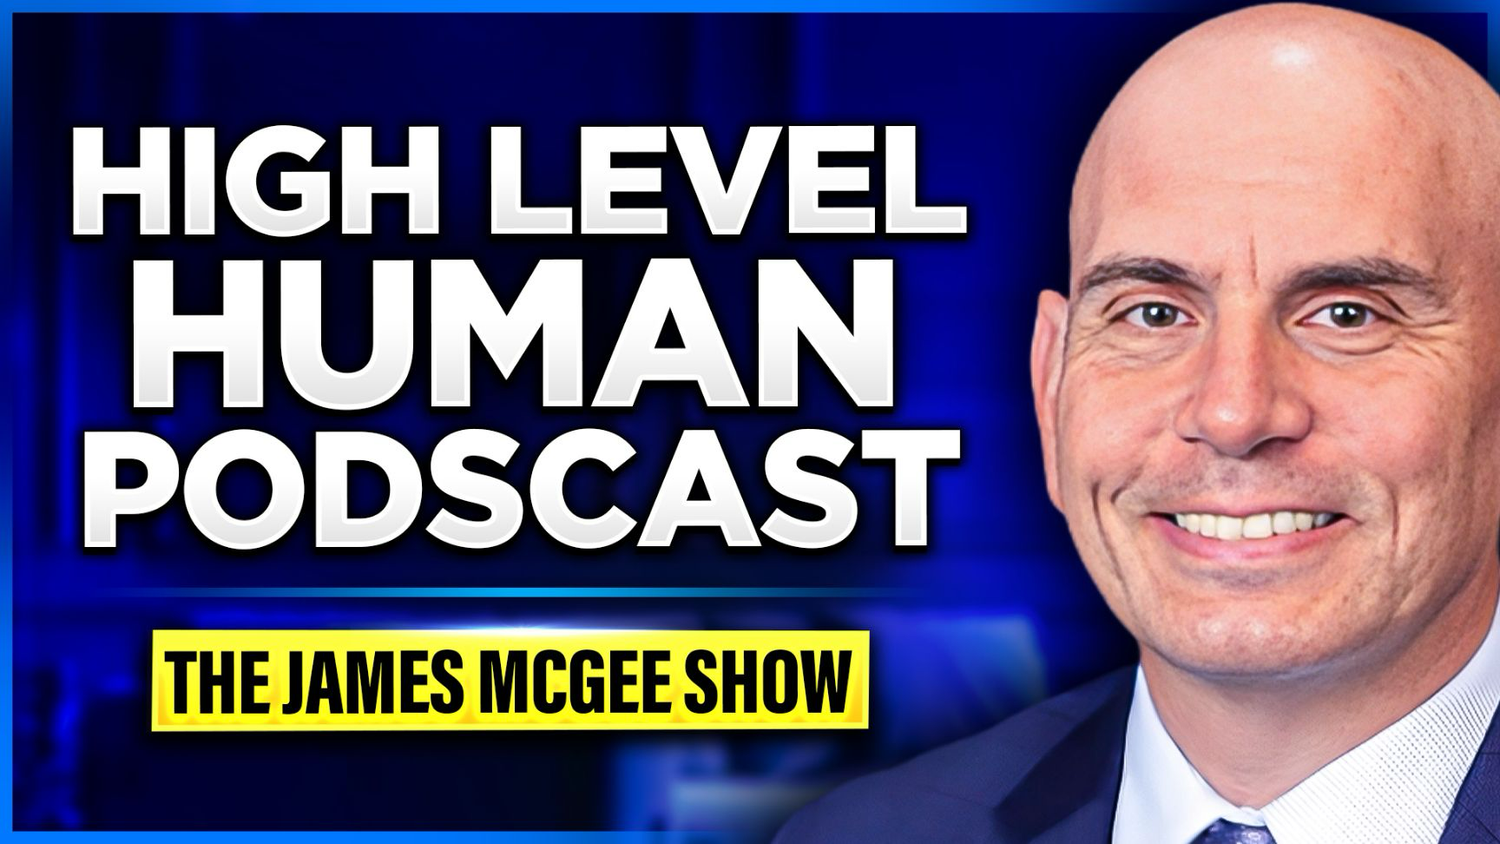 The James McGee Show